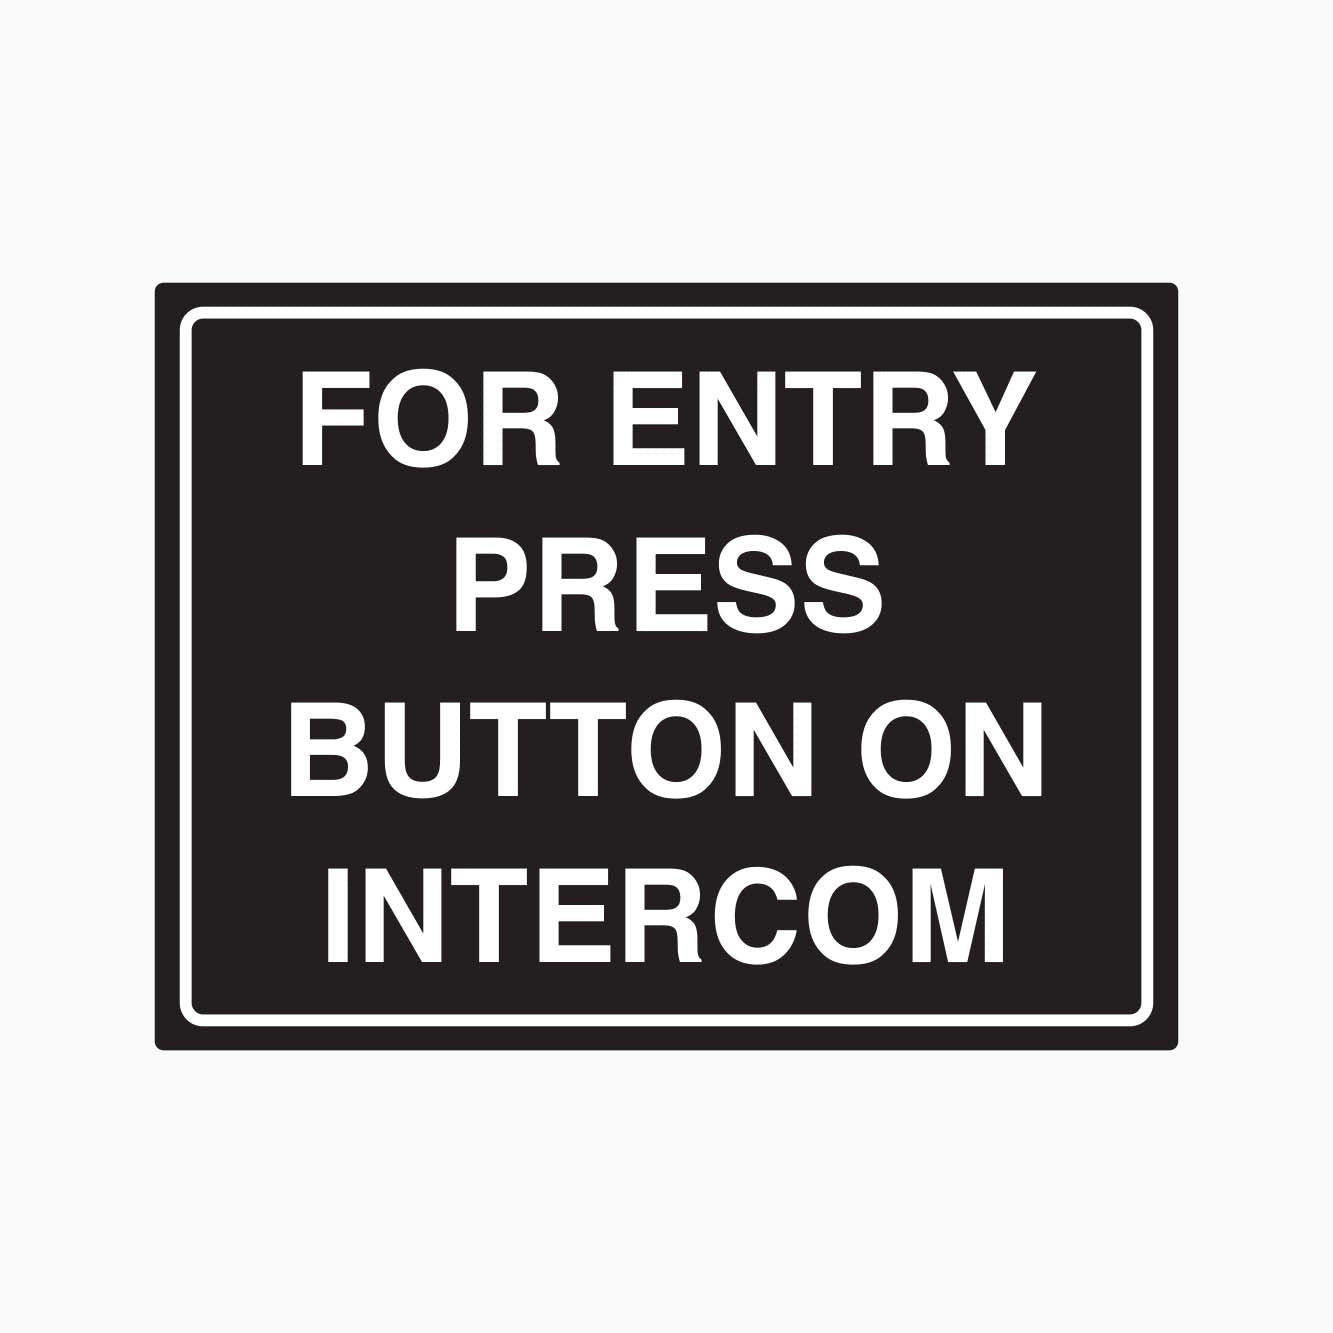 FOR ENTRY PRESS BUTTON ON INTERCOM SIGN